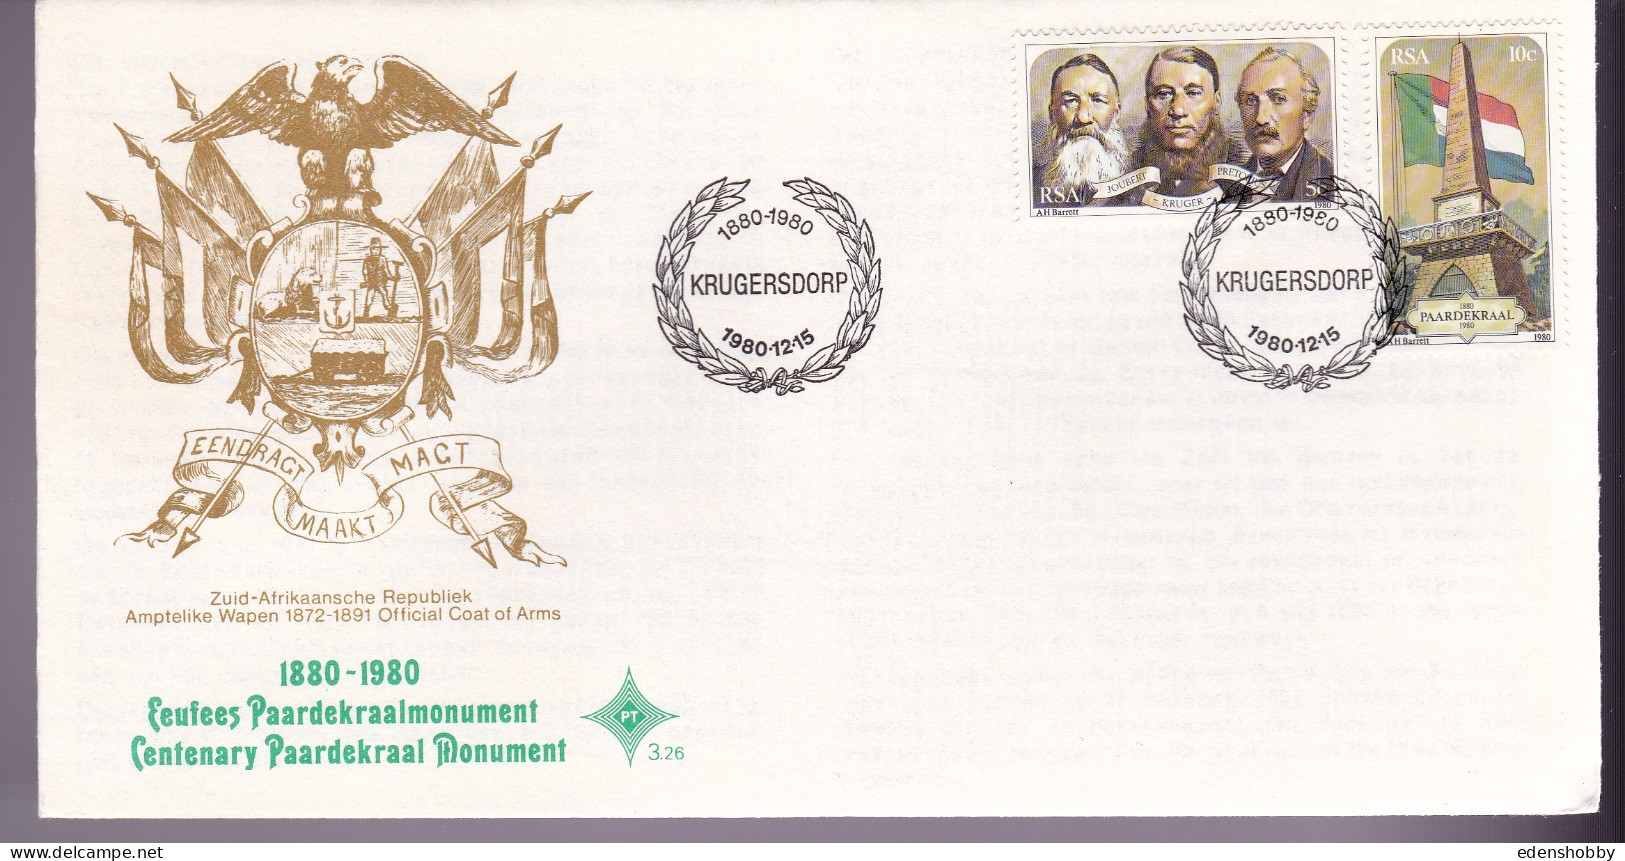 1980 SOUTH AFRICA RSA 8 Official First day Covers  FDC 3.21, S5, 3.22, 3.23, 3.24, 3.25, S6, 3.26